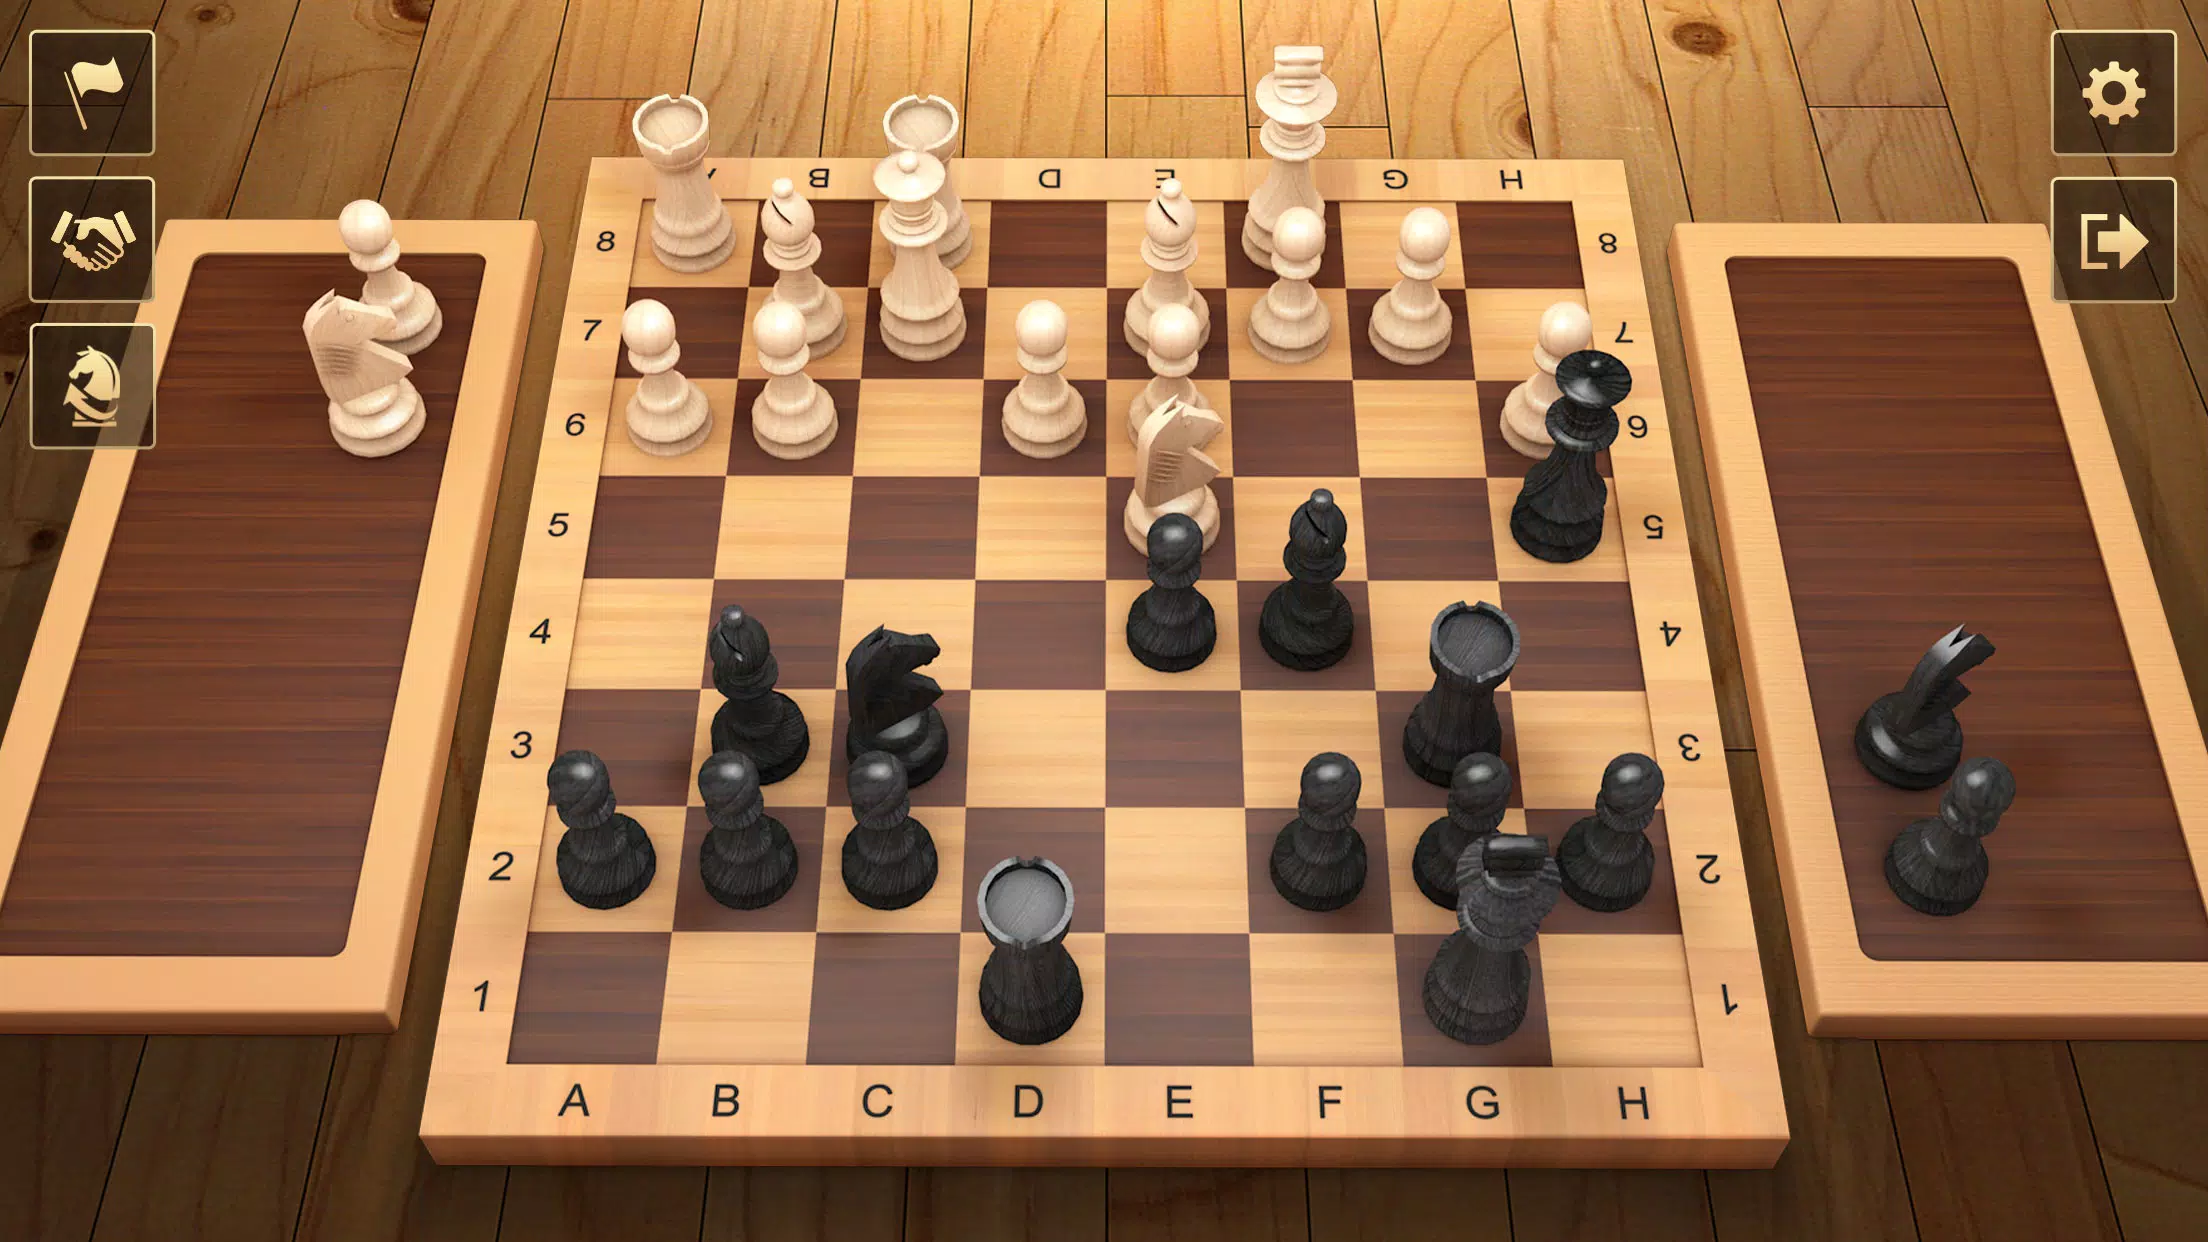 Download Chess 2.8.1 APK (MOD adfree) for android